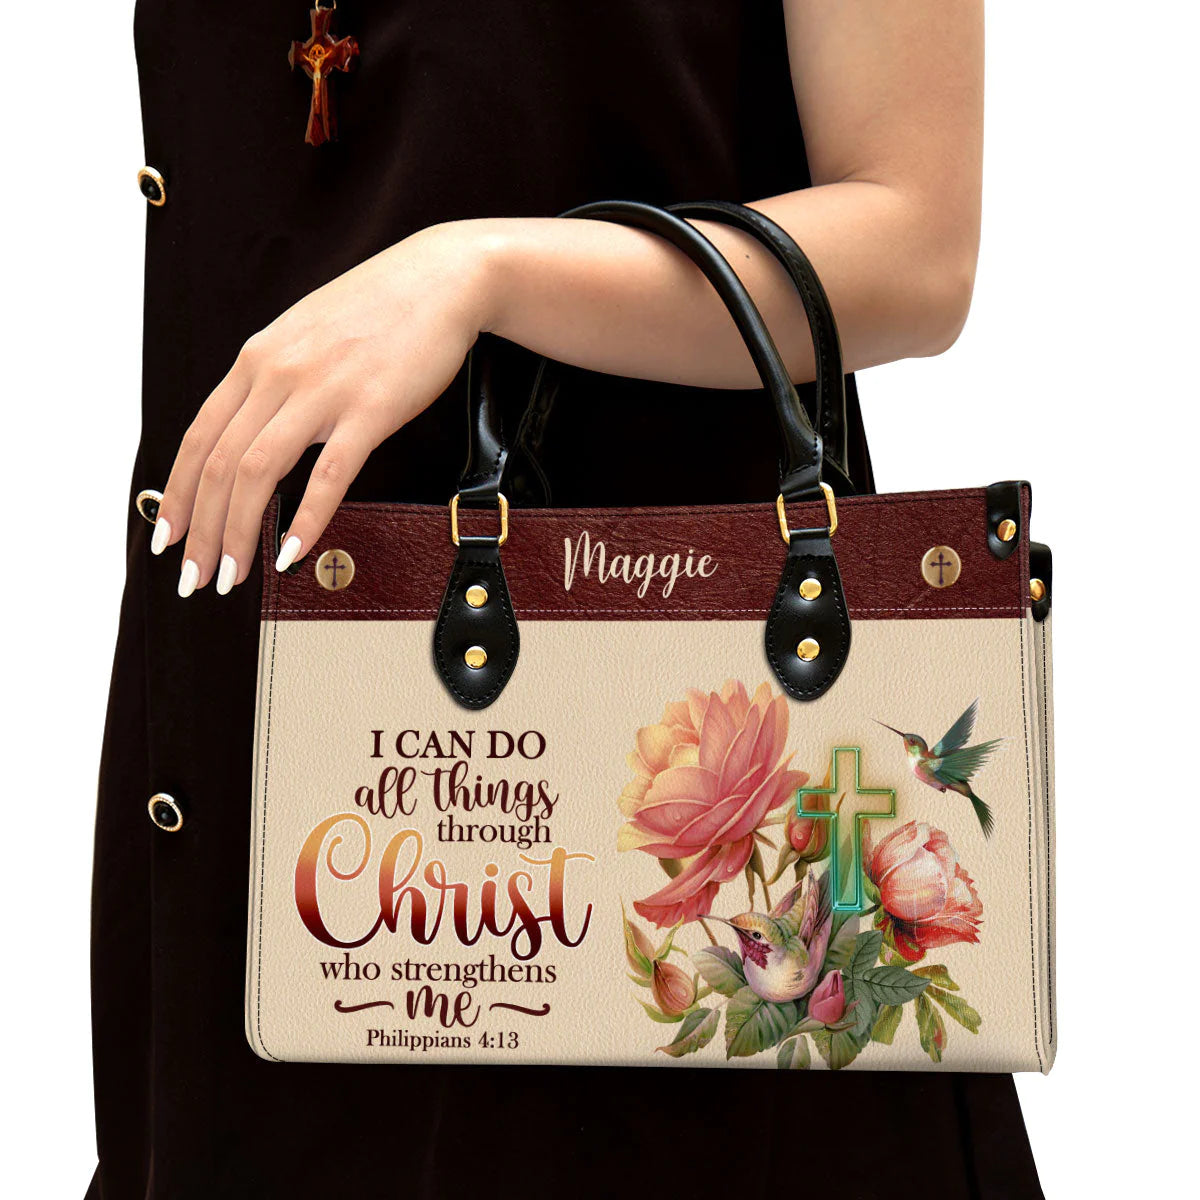 Christianartbag Handbags, I Can Do All Things Through Christ Philippians 41:3 Leather Bags, Personalized Bags, Gifts for Women, Christmas Gift, CABLTB01300723. - Christian Art Bag